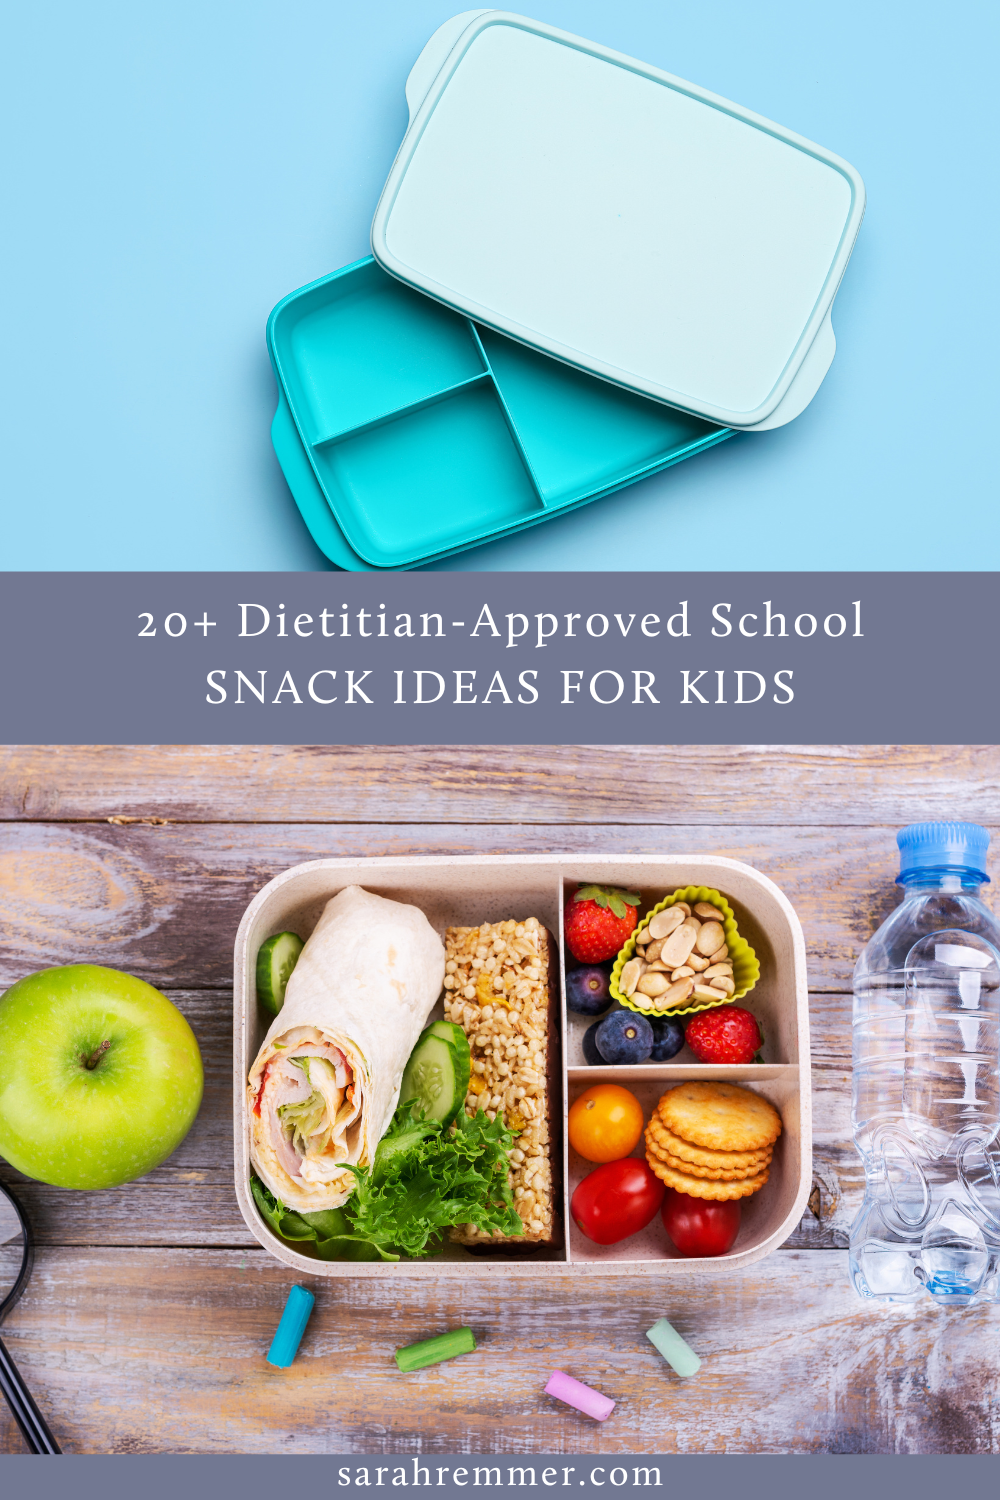 Do you ever find yourself in a “slump” when it comes to coming up with school snack ideas for your kids? As a dietitian mom, here's a list of snack ideas!